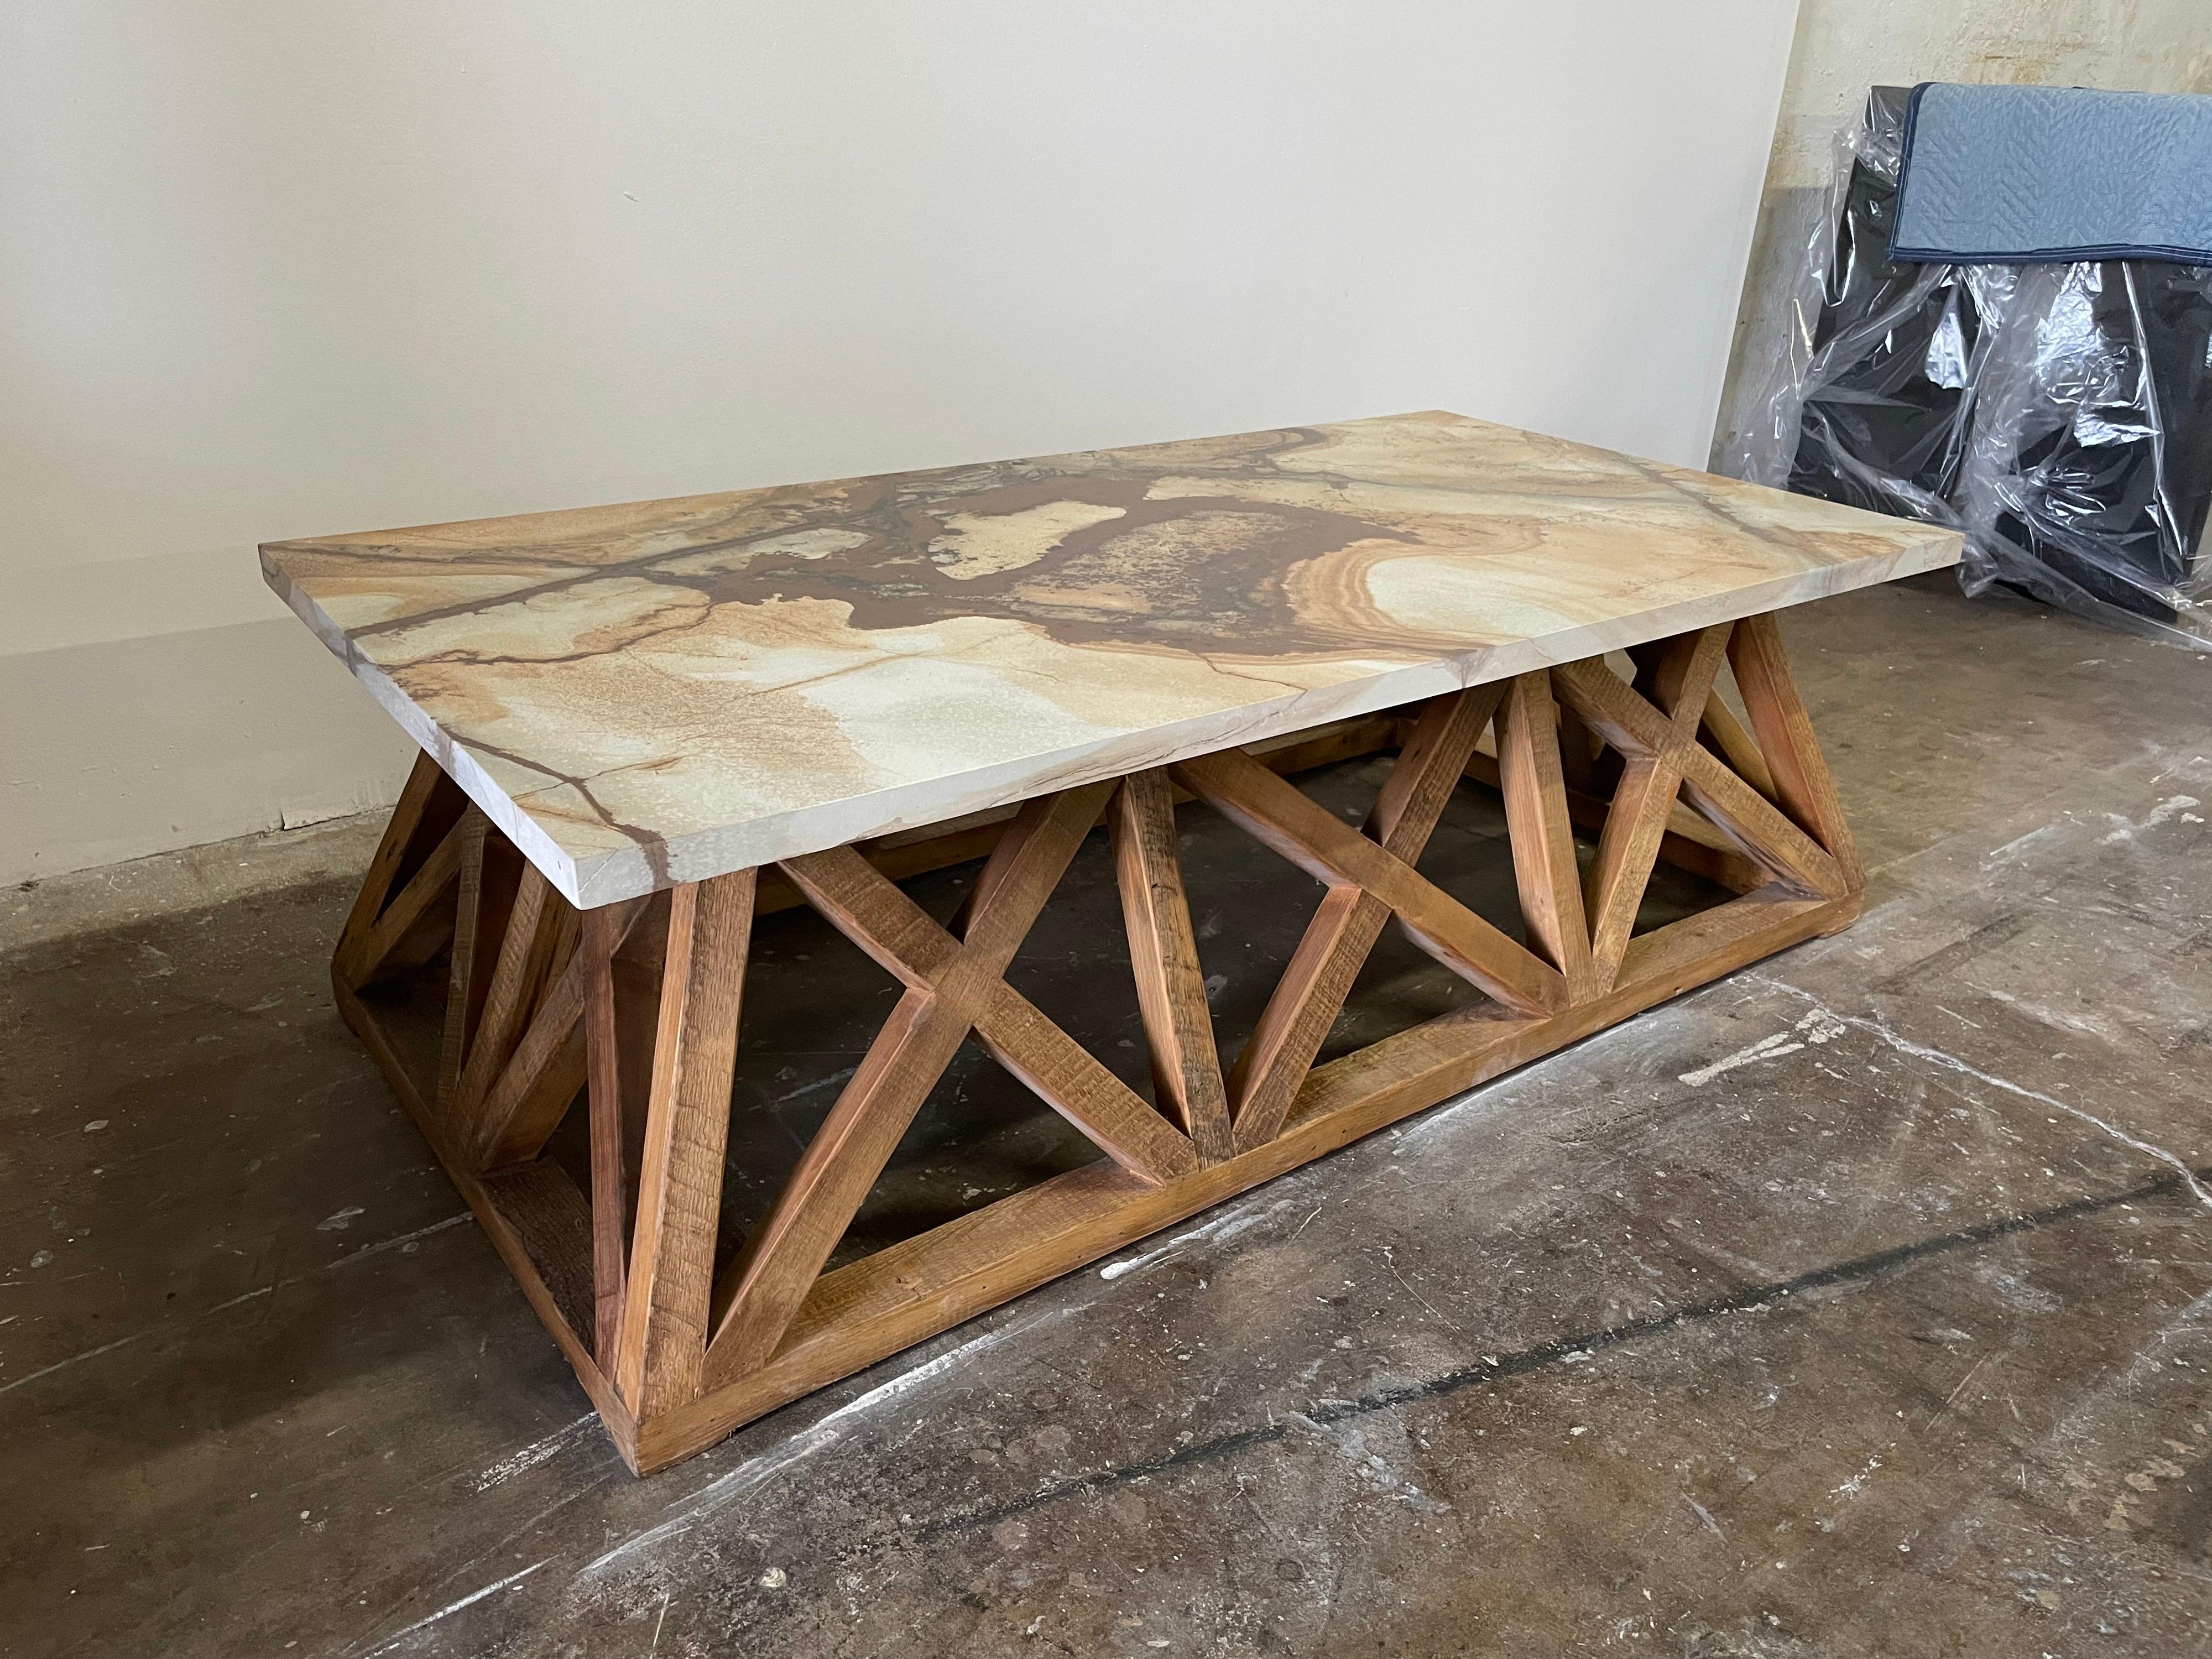 This is one of a pair available. Rustic and organic latticed base with flare out design. The siena marble top has beautiful neutral coloring and is perfect for any modern or beach decor! Wood is naturally varied in colors which work beautifully with